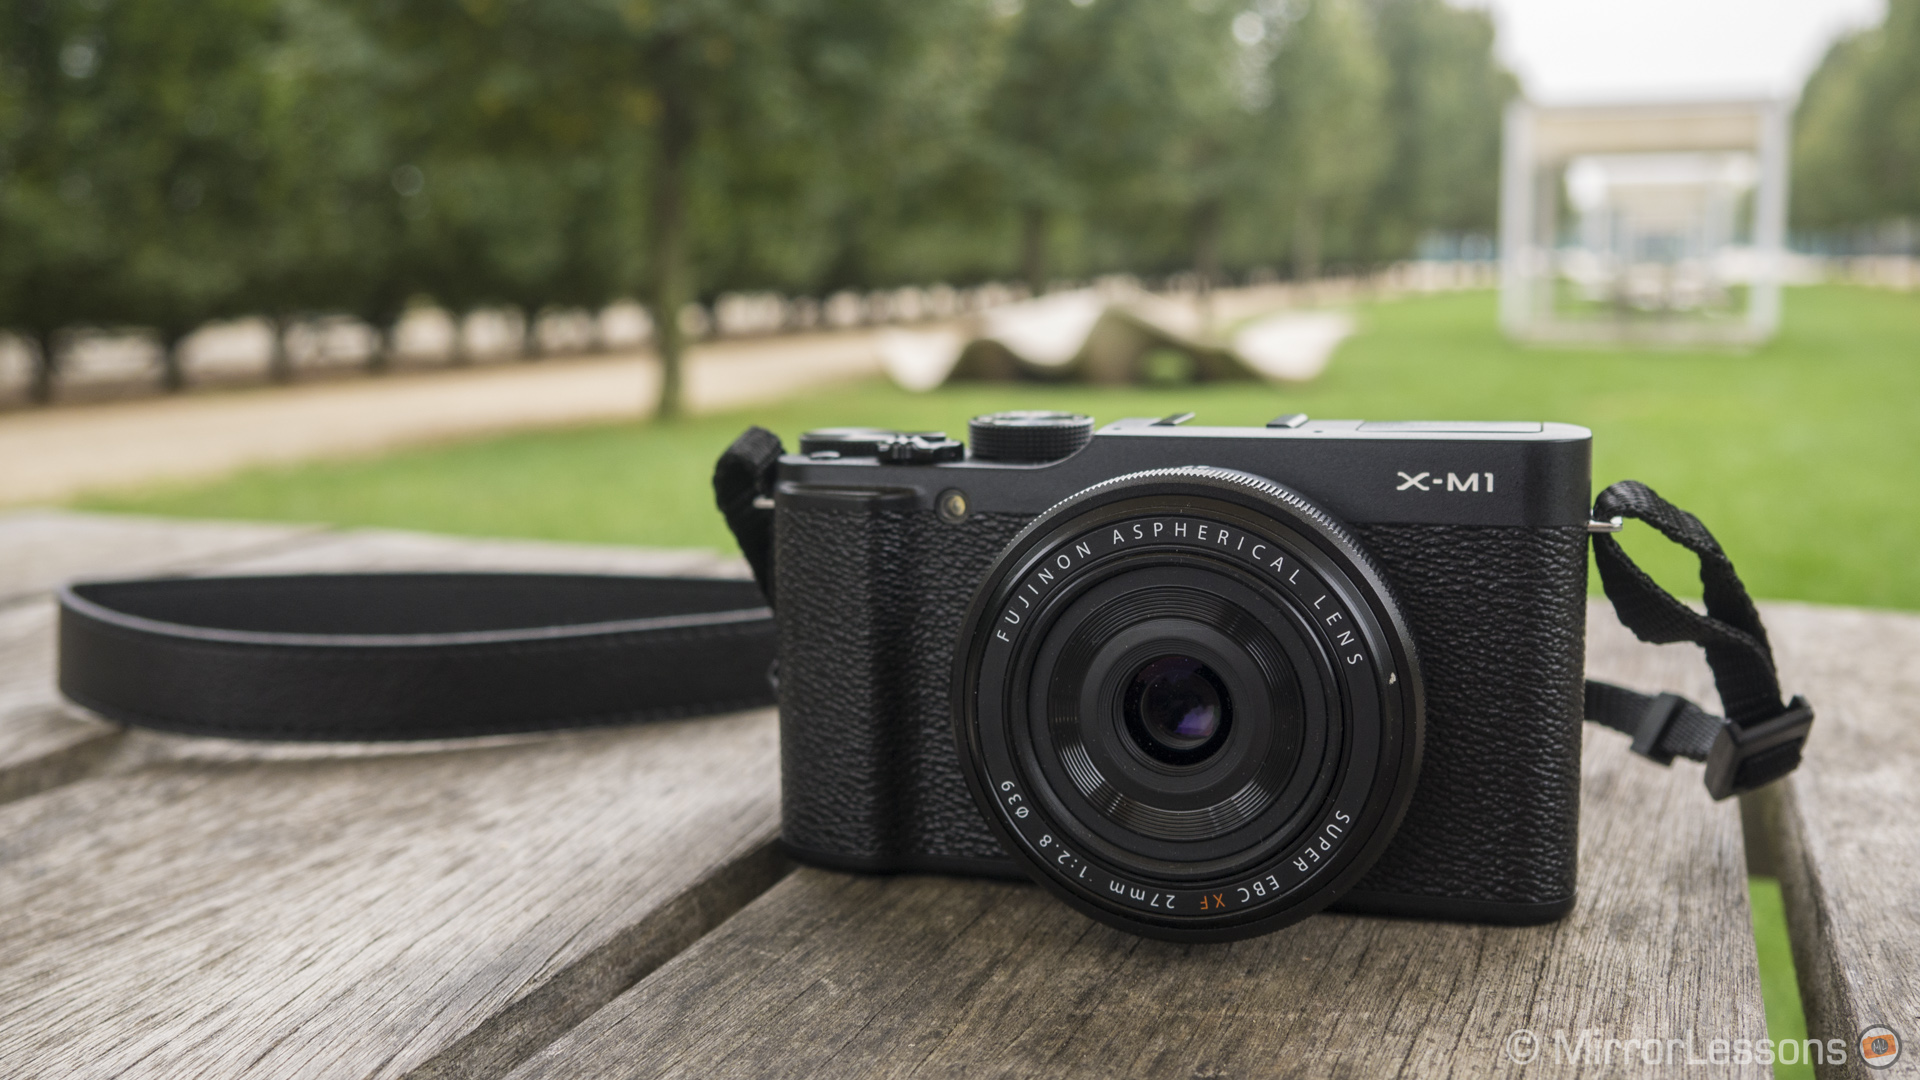 Wantrouwen viering stroomkring When Low-End Doesn't Mean Low Quality: A Fujifilm X-M1 Review